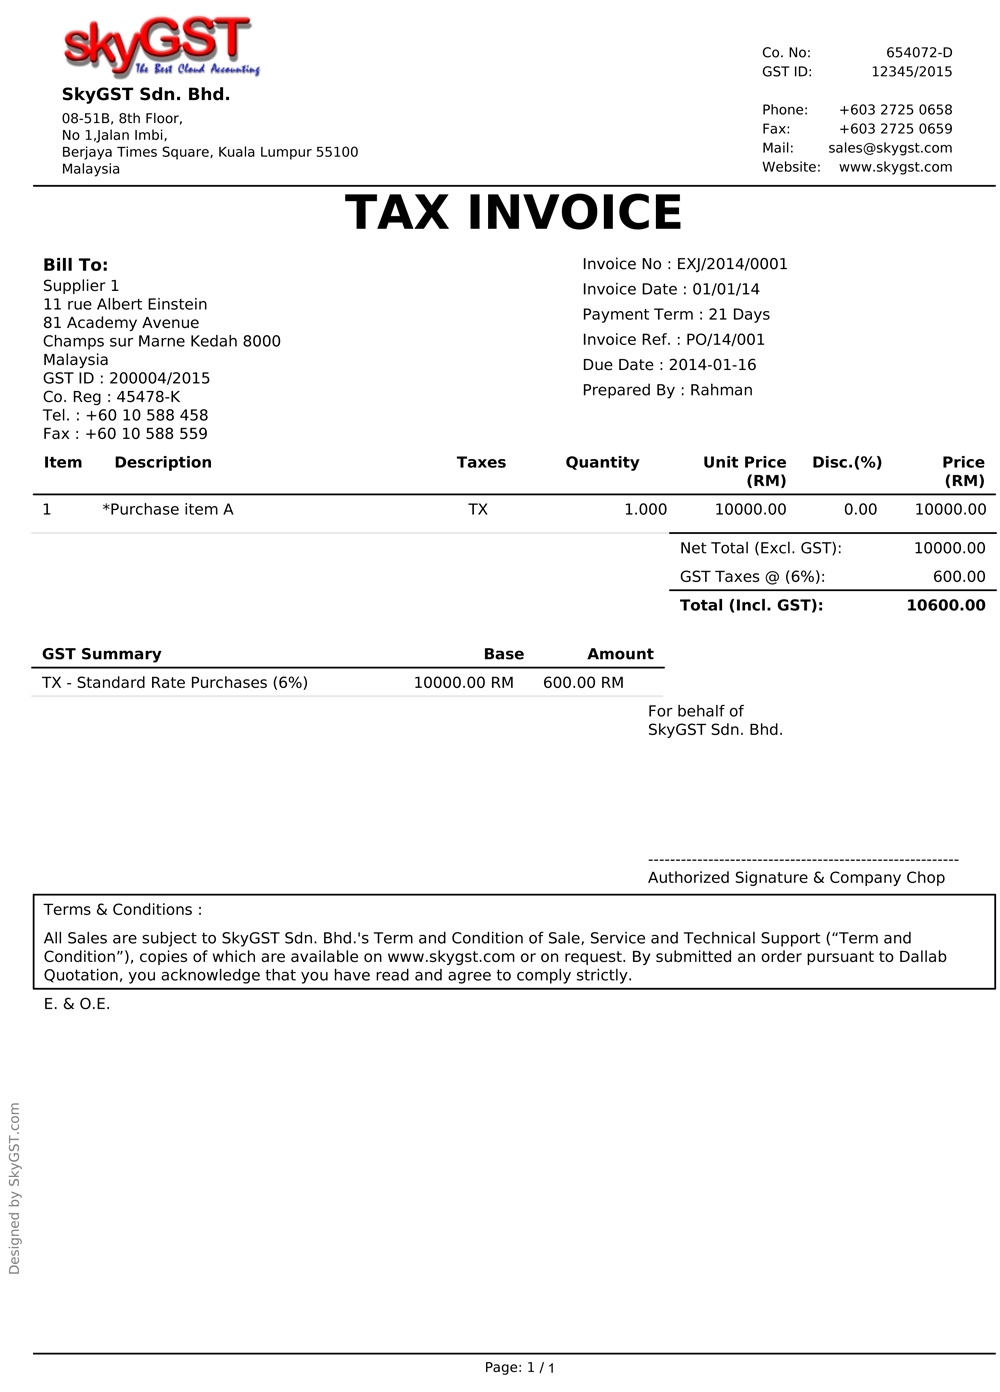 tax invoice gst invoice template free 2016 not registered for gst tax invoice